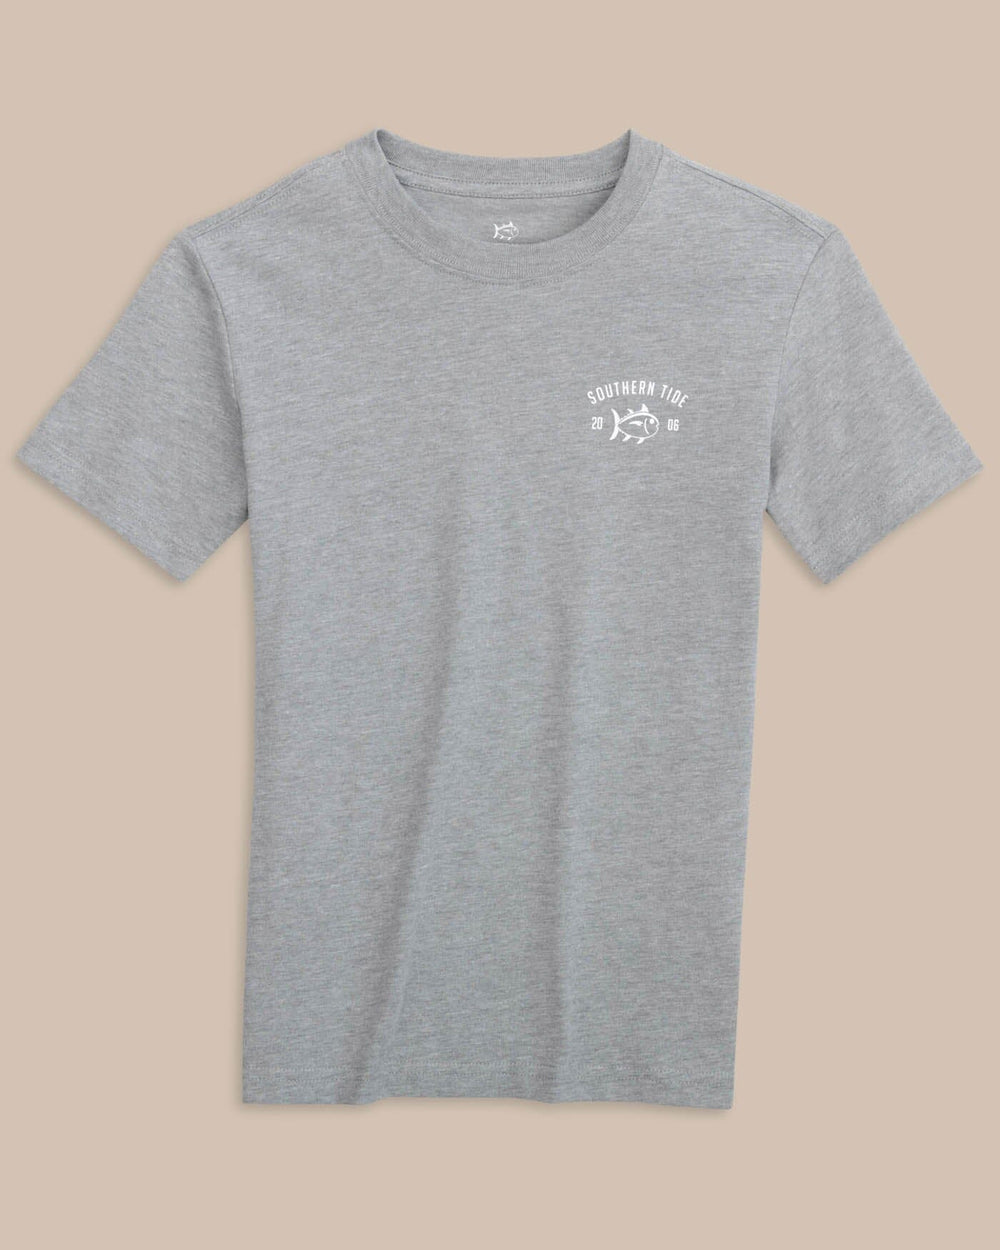 The front view of the Southern Tide Kids RRR SJ Heather T-shirt by Southern Tide - Heather Quarry